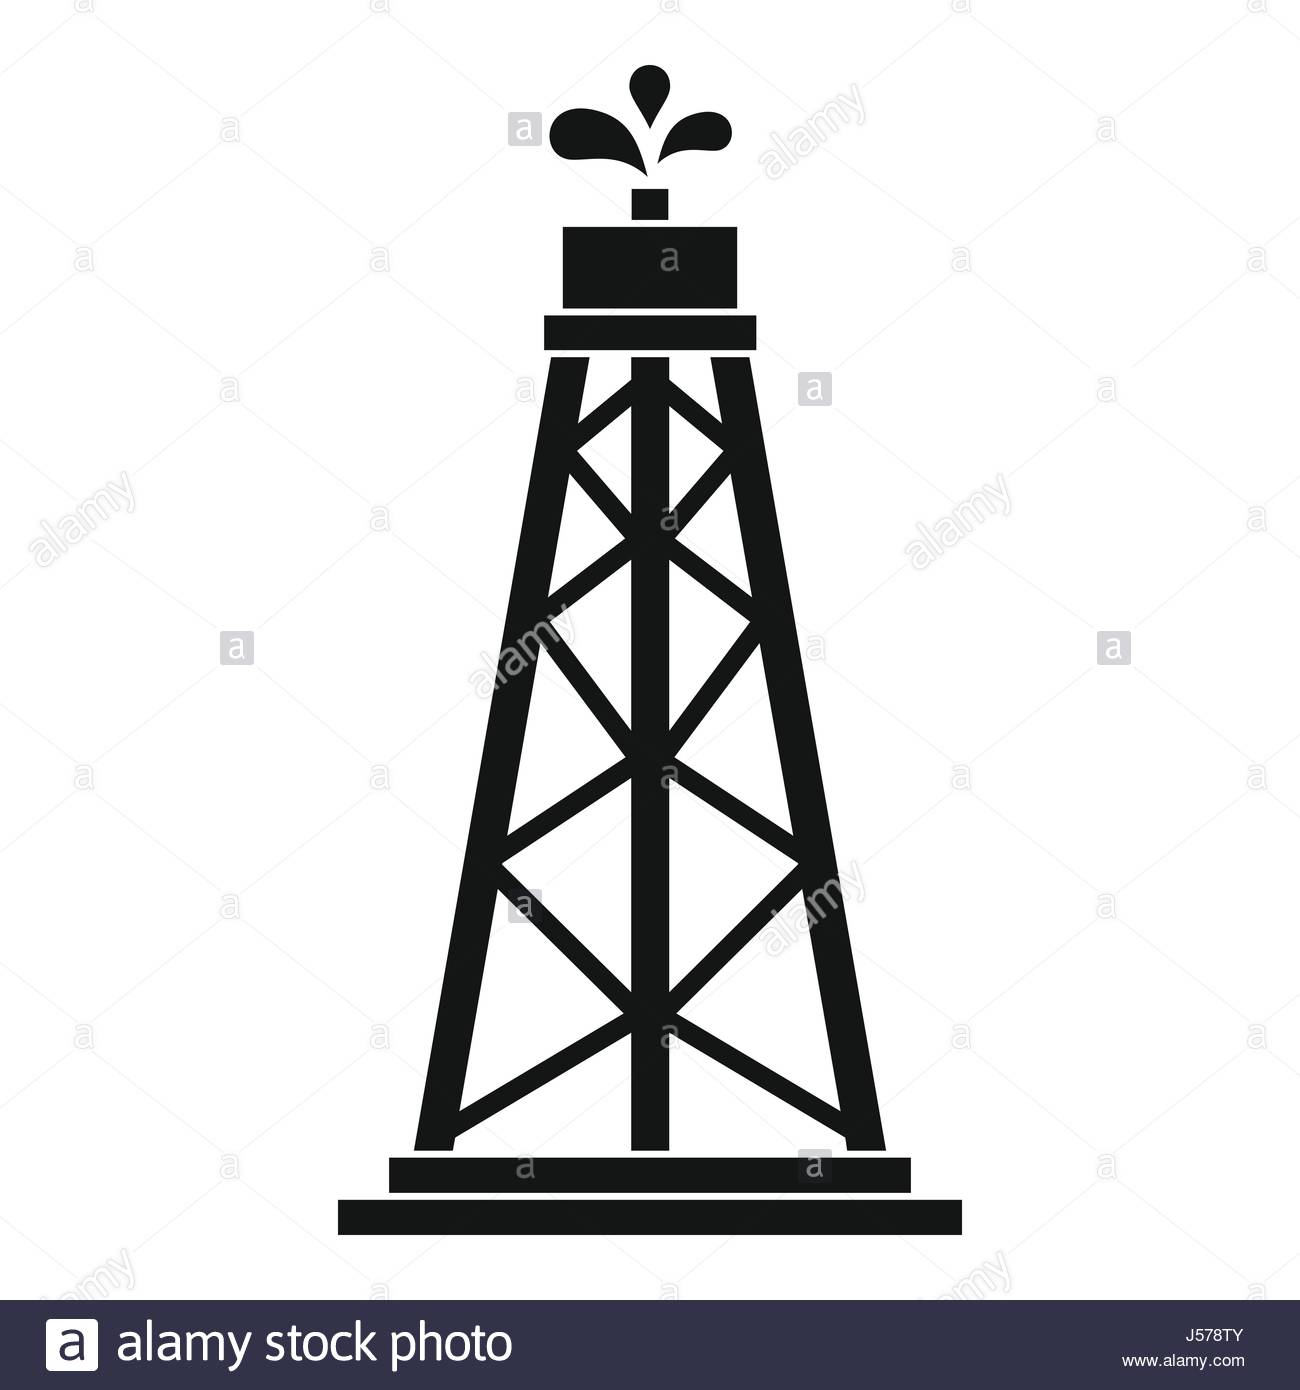 Offshore-drilling icons | Noun Project